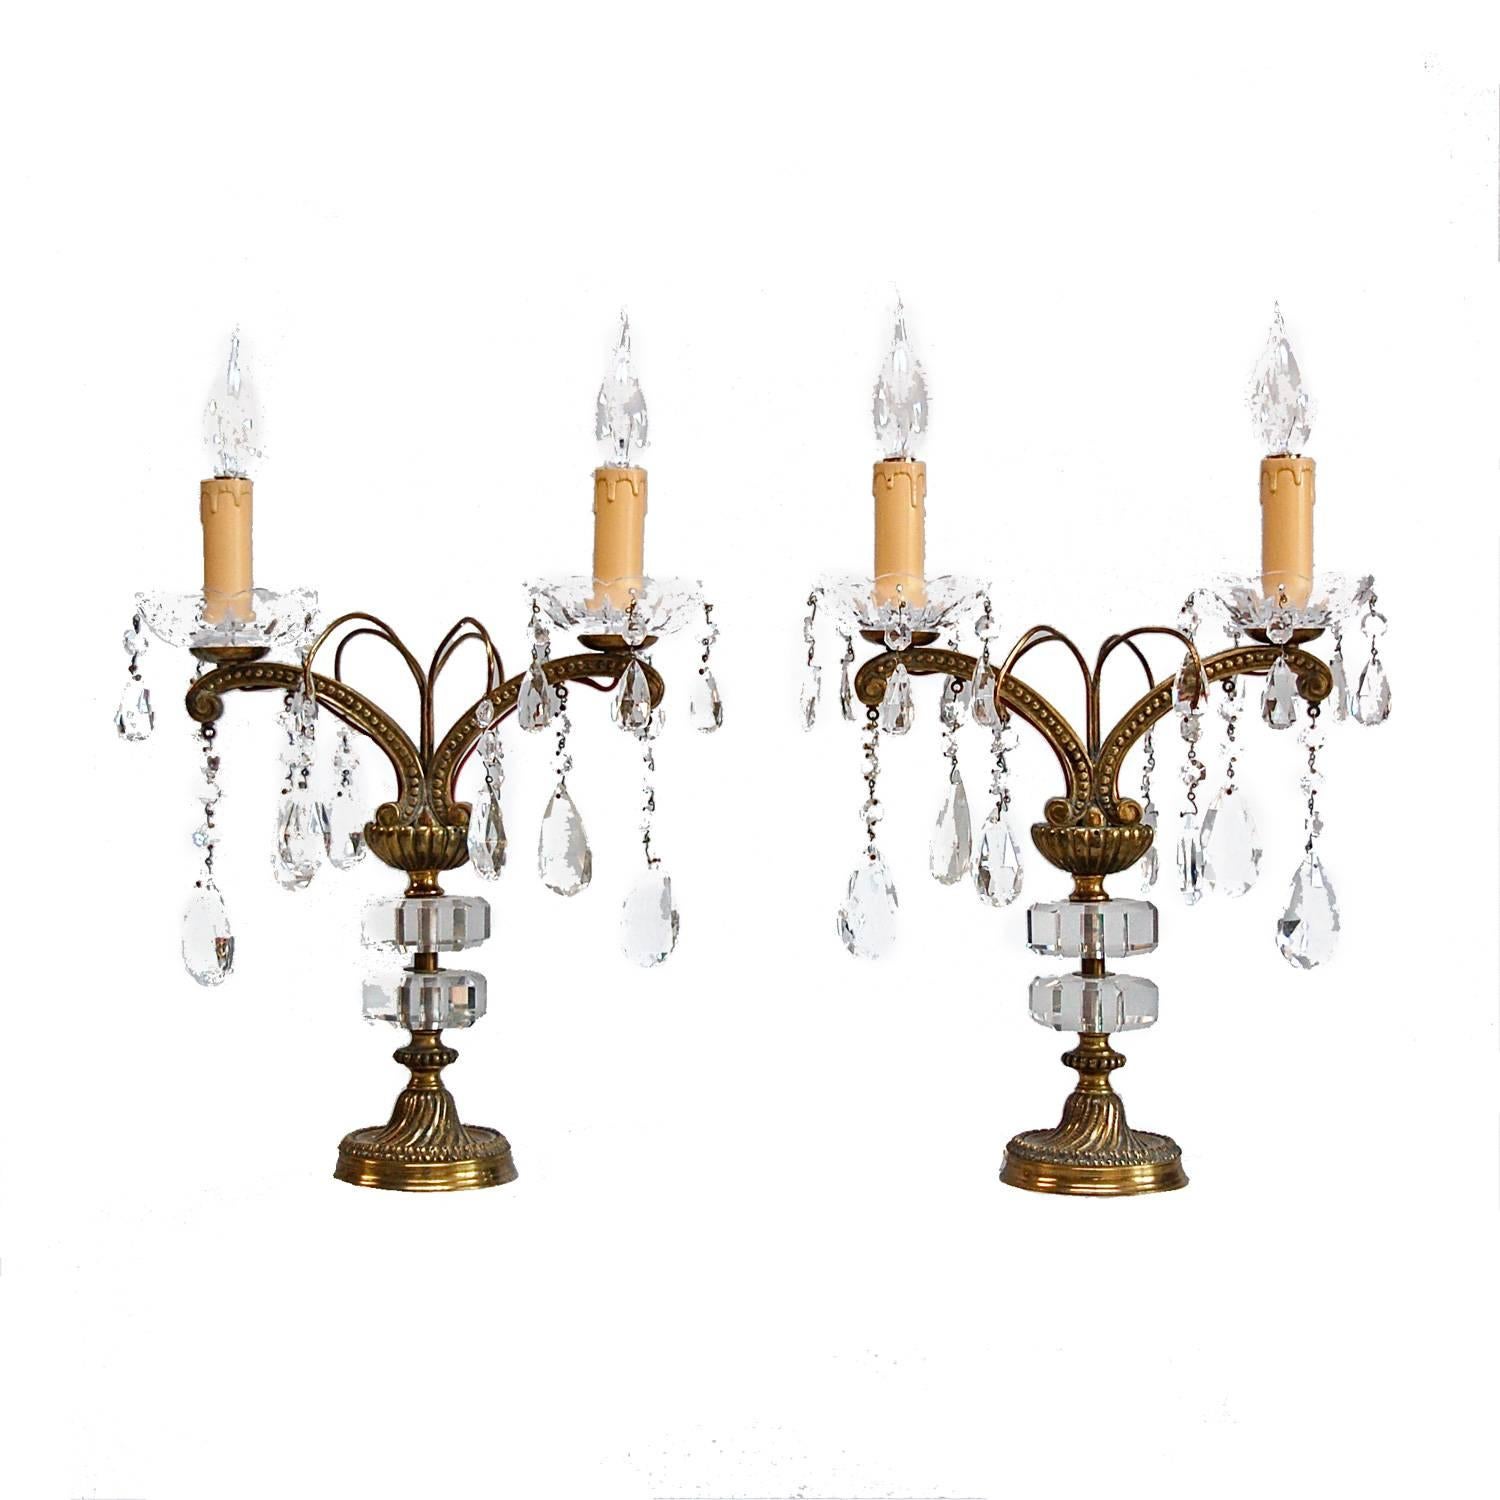 Pair of Candlestick Table Lamps with Usual Crystal Detail, 1950s France For Sale